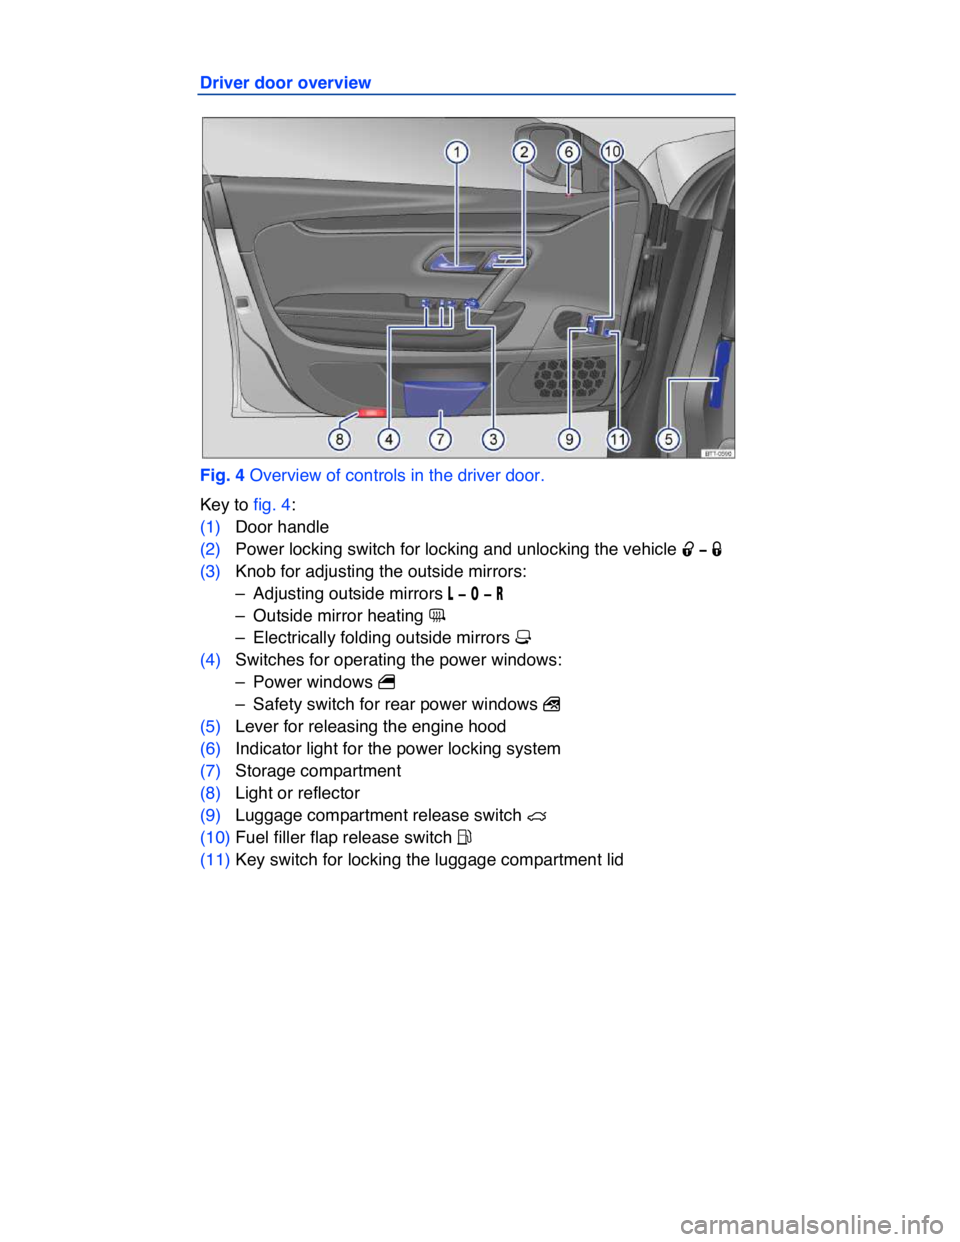 VOLKSWAGEN CC 2011  Owners Manual  
Driver door overview 
 
Fig. 4 Overview of controls in the driver door. 
Key to fig. 4: 
(1) Door handle  
(2) Power locking switch for locking and unlocking the vehicle �0 �